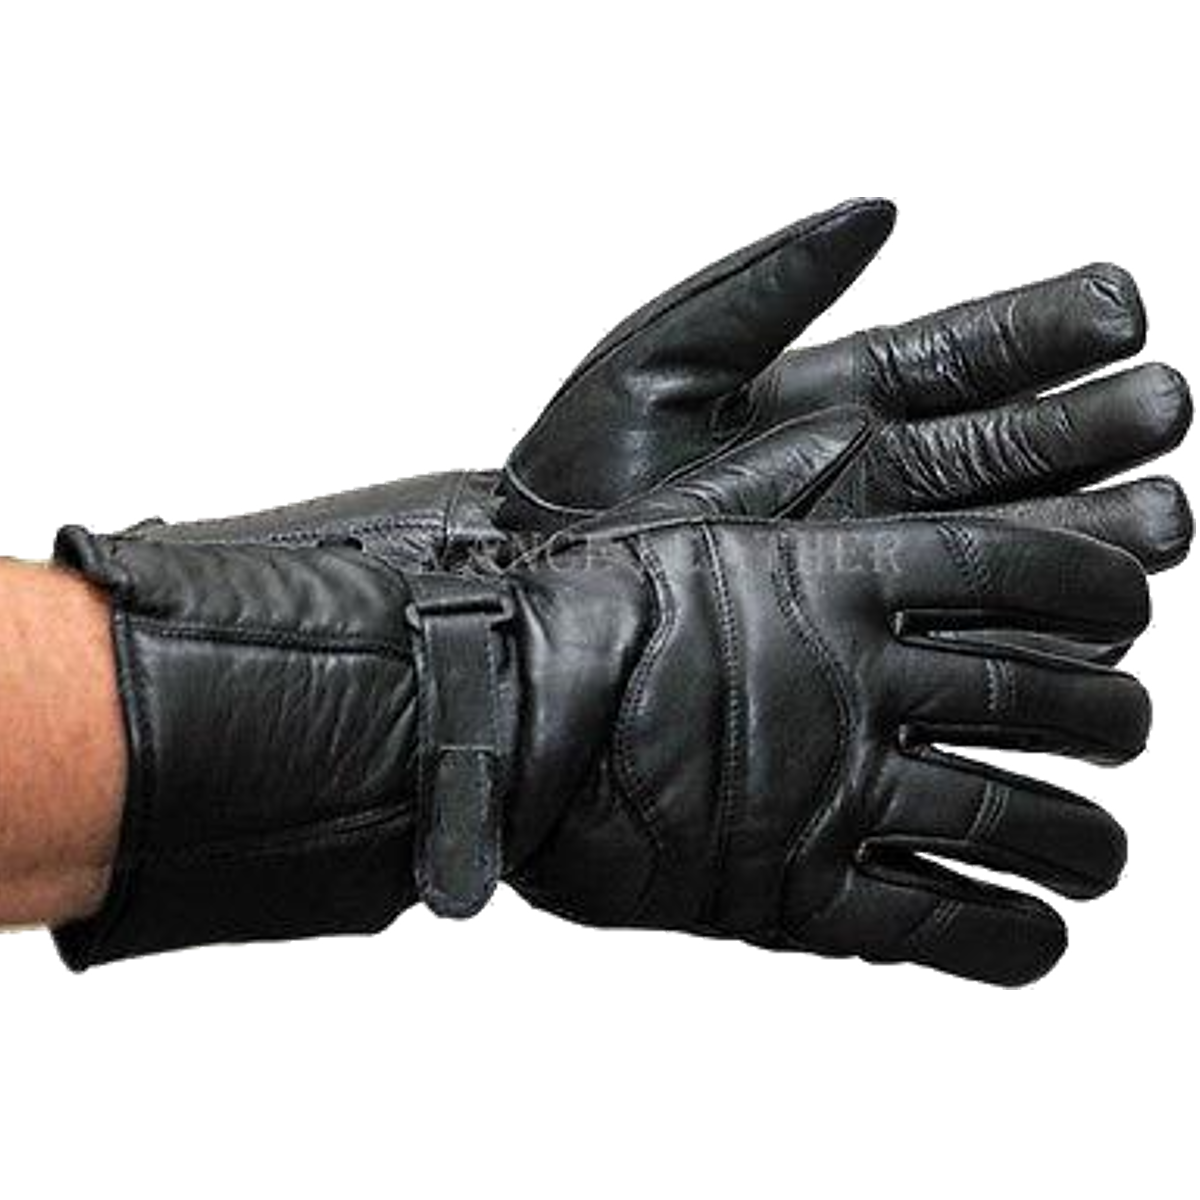 Vance Insulated Leather Gauntlet Gloves